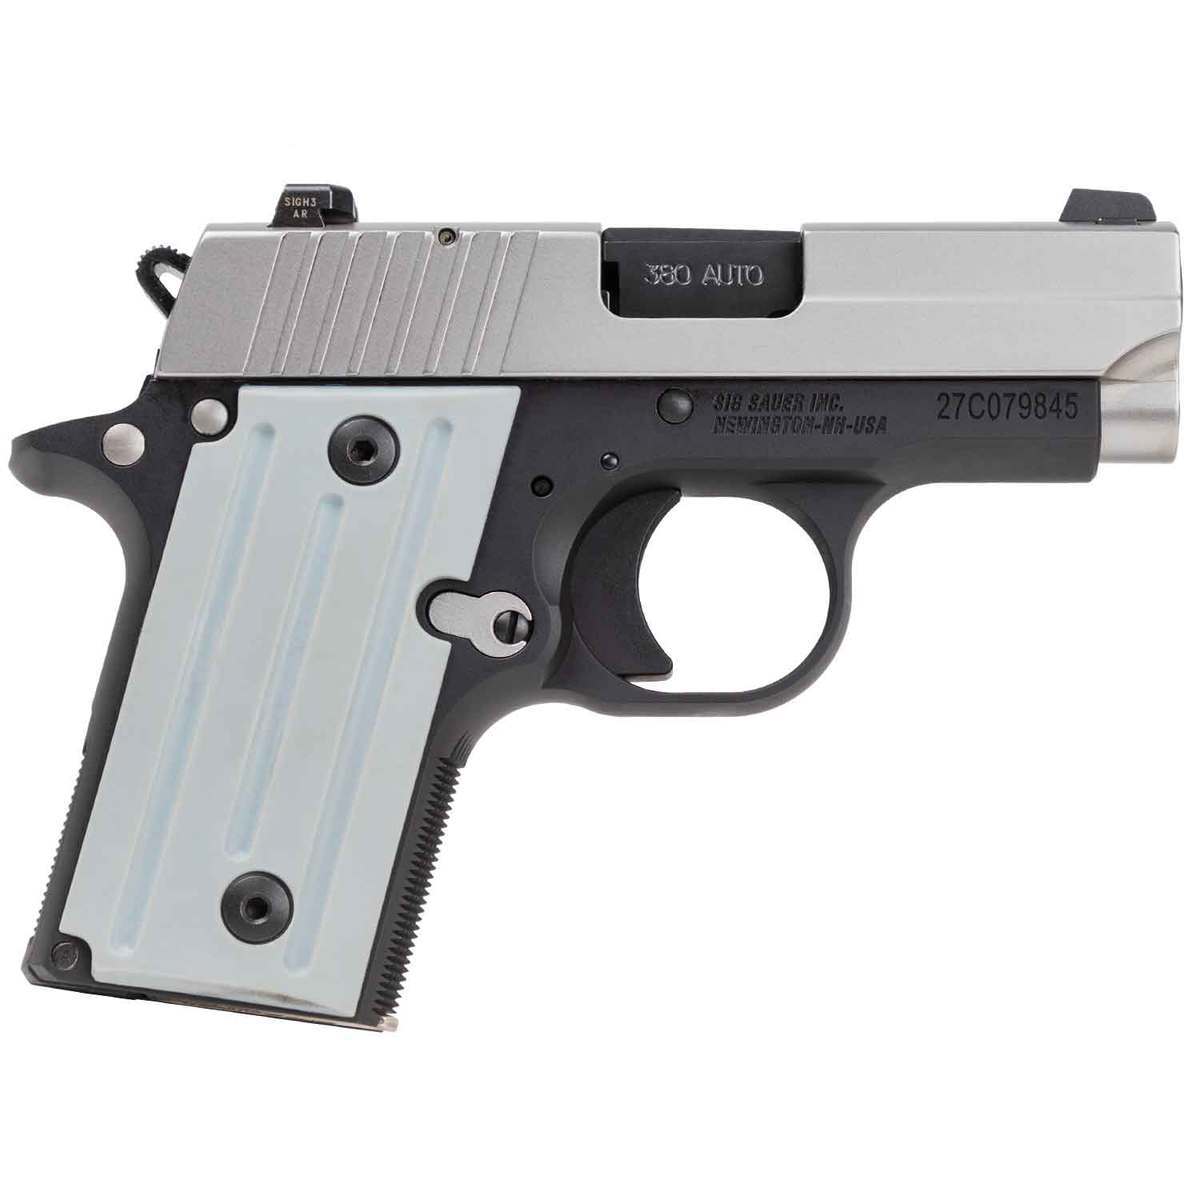 sig sauer p238 2 tone 380 auto acp 27in stainlessblack pistol 61 rounds california compliant 1663893 1 1